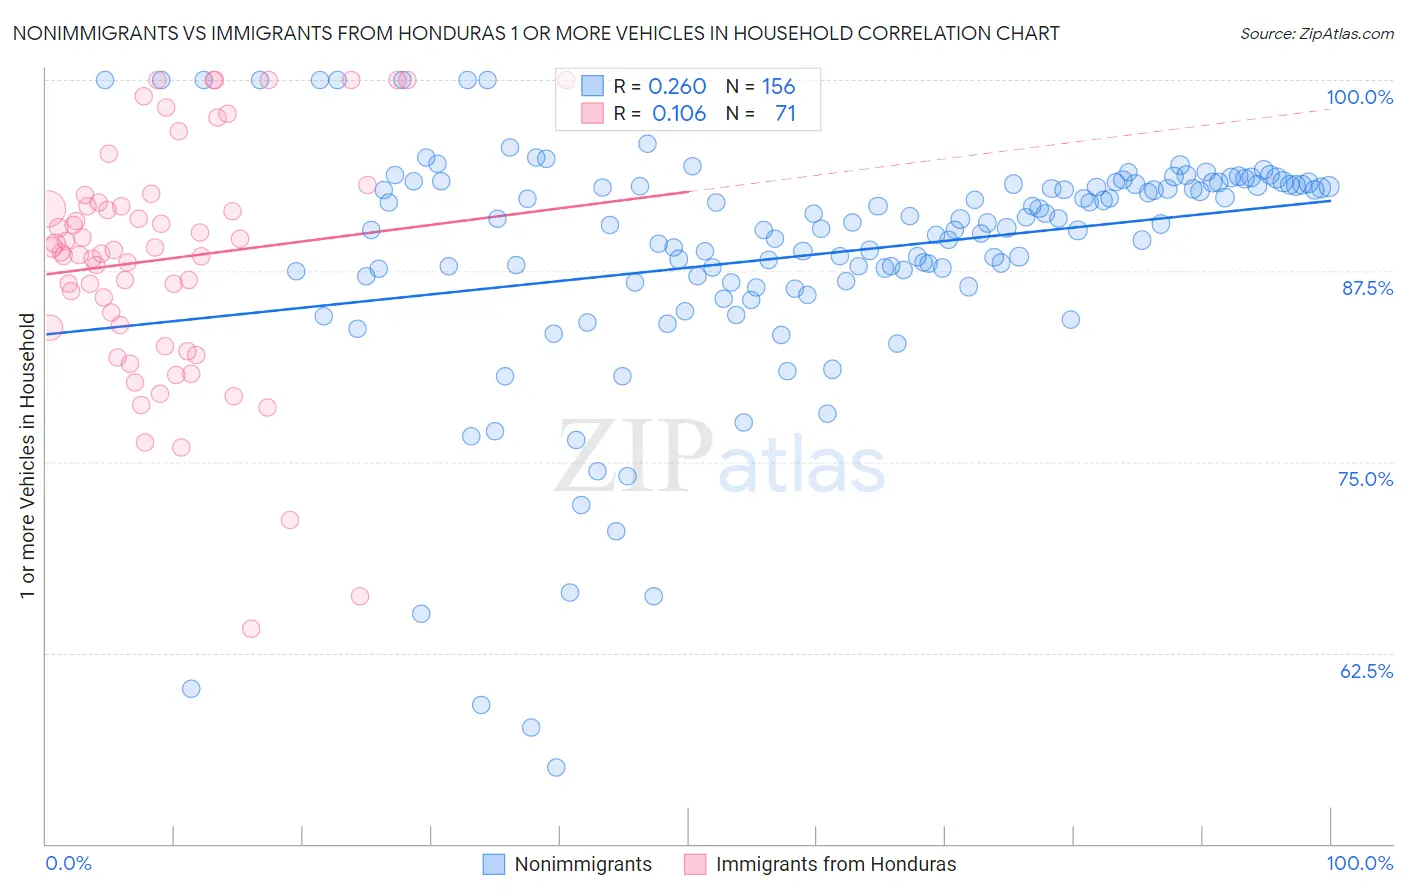 Nonimmigrants vs Immigrants from Honduras 1 or more Vehicles in Household